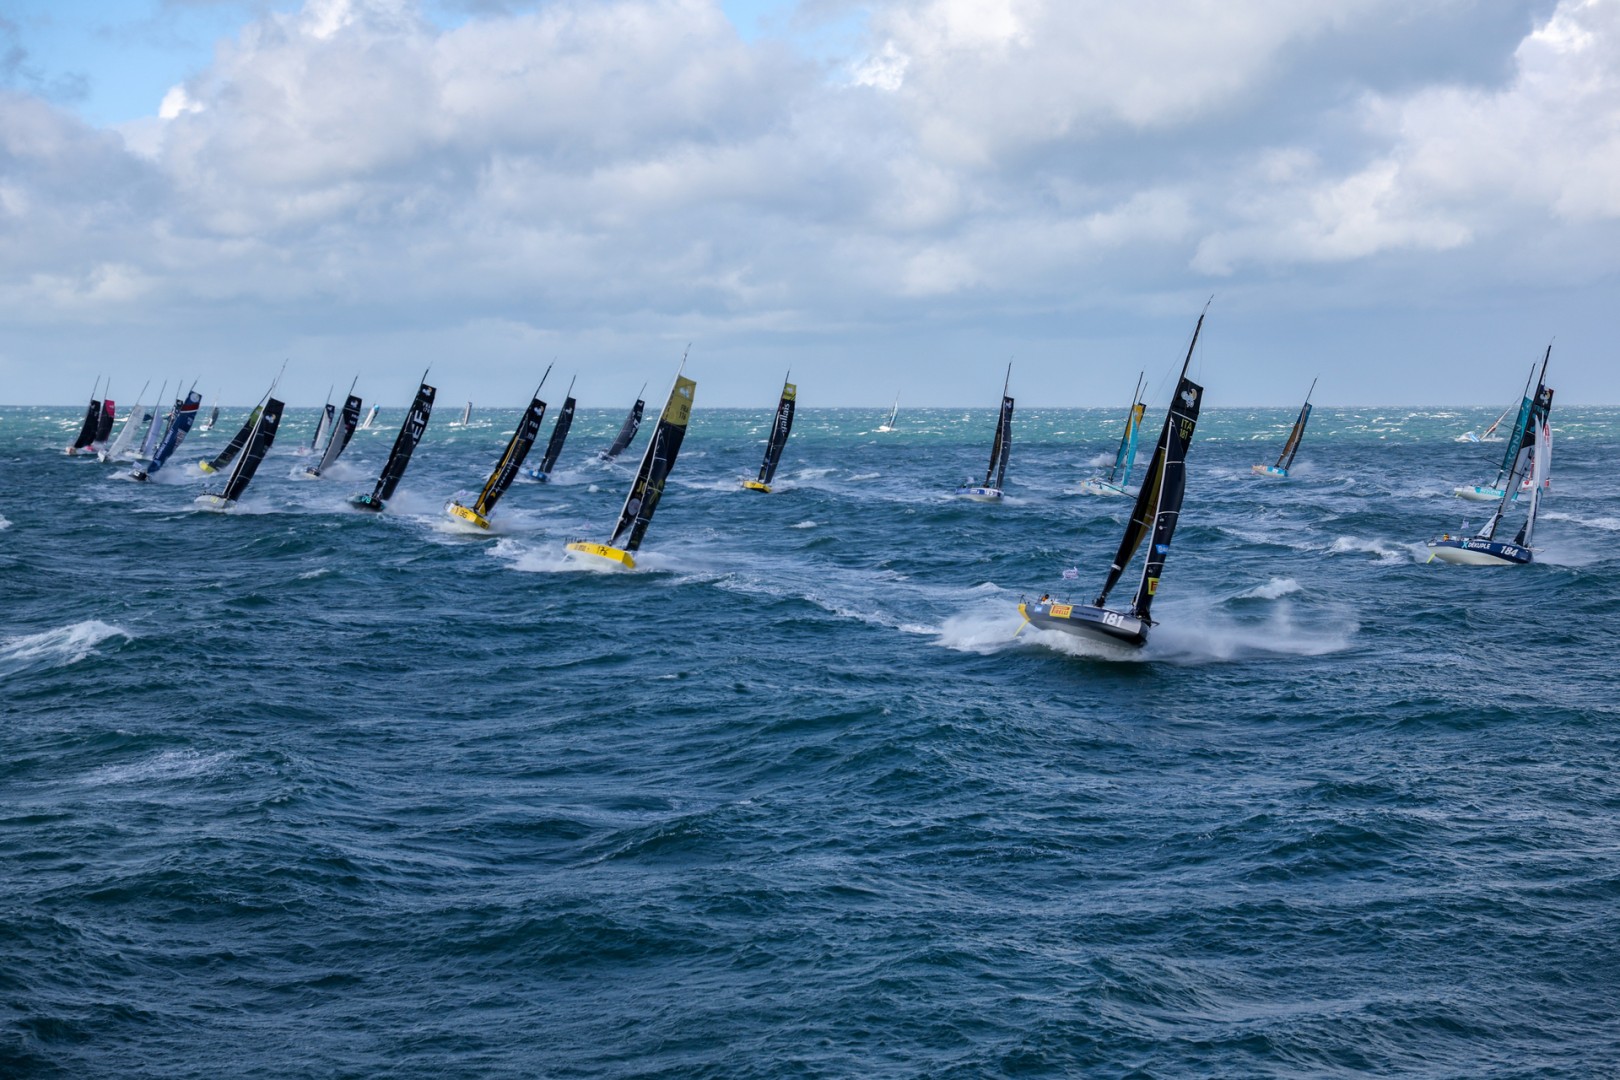 Three classes enjoy great start and IMOCAs remain in port